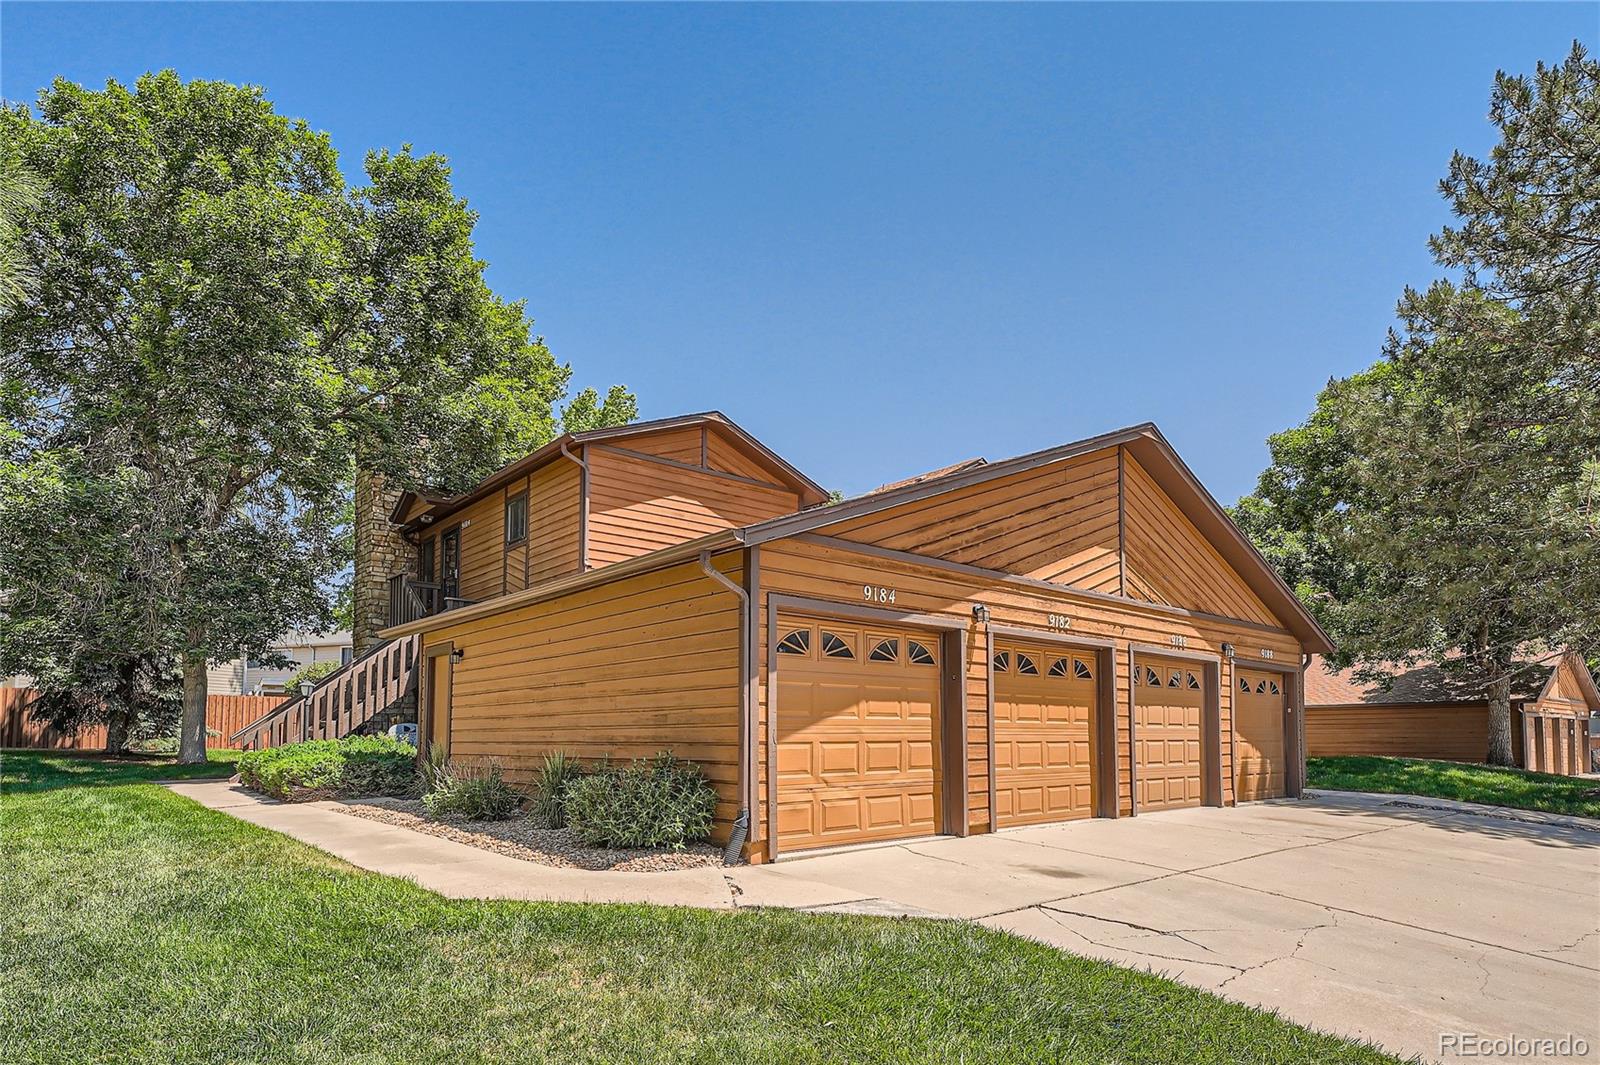 Report Image for 9184 W 88th Circle,Westminster, Colorado